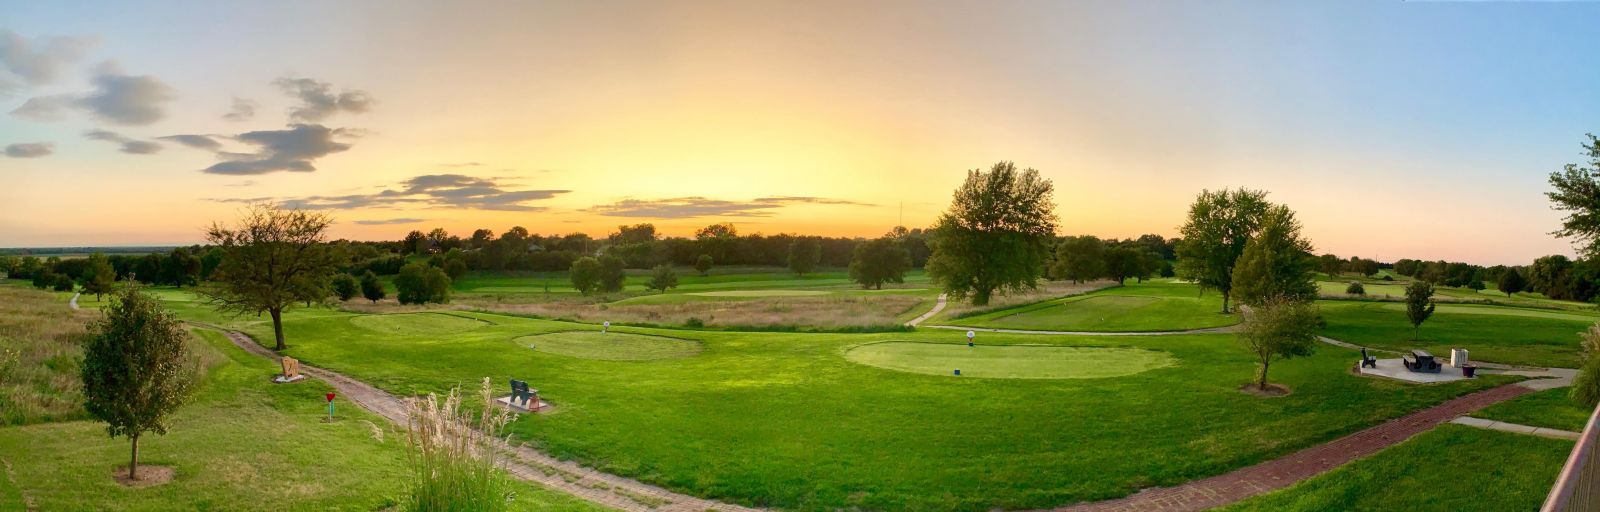 Photo of the course at sundown. 